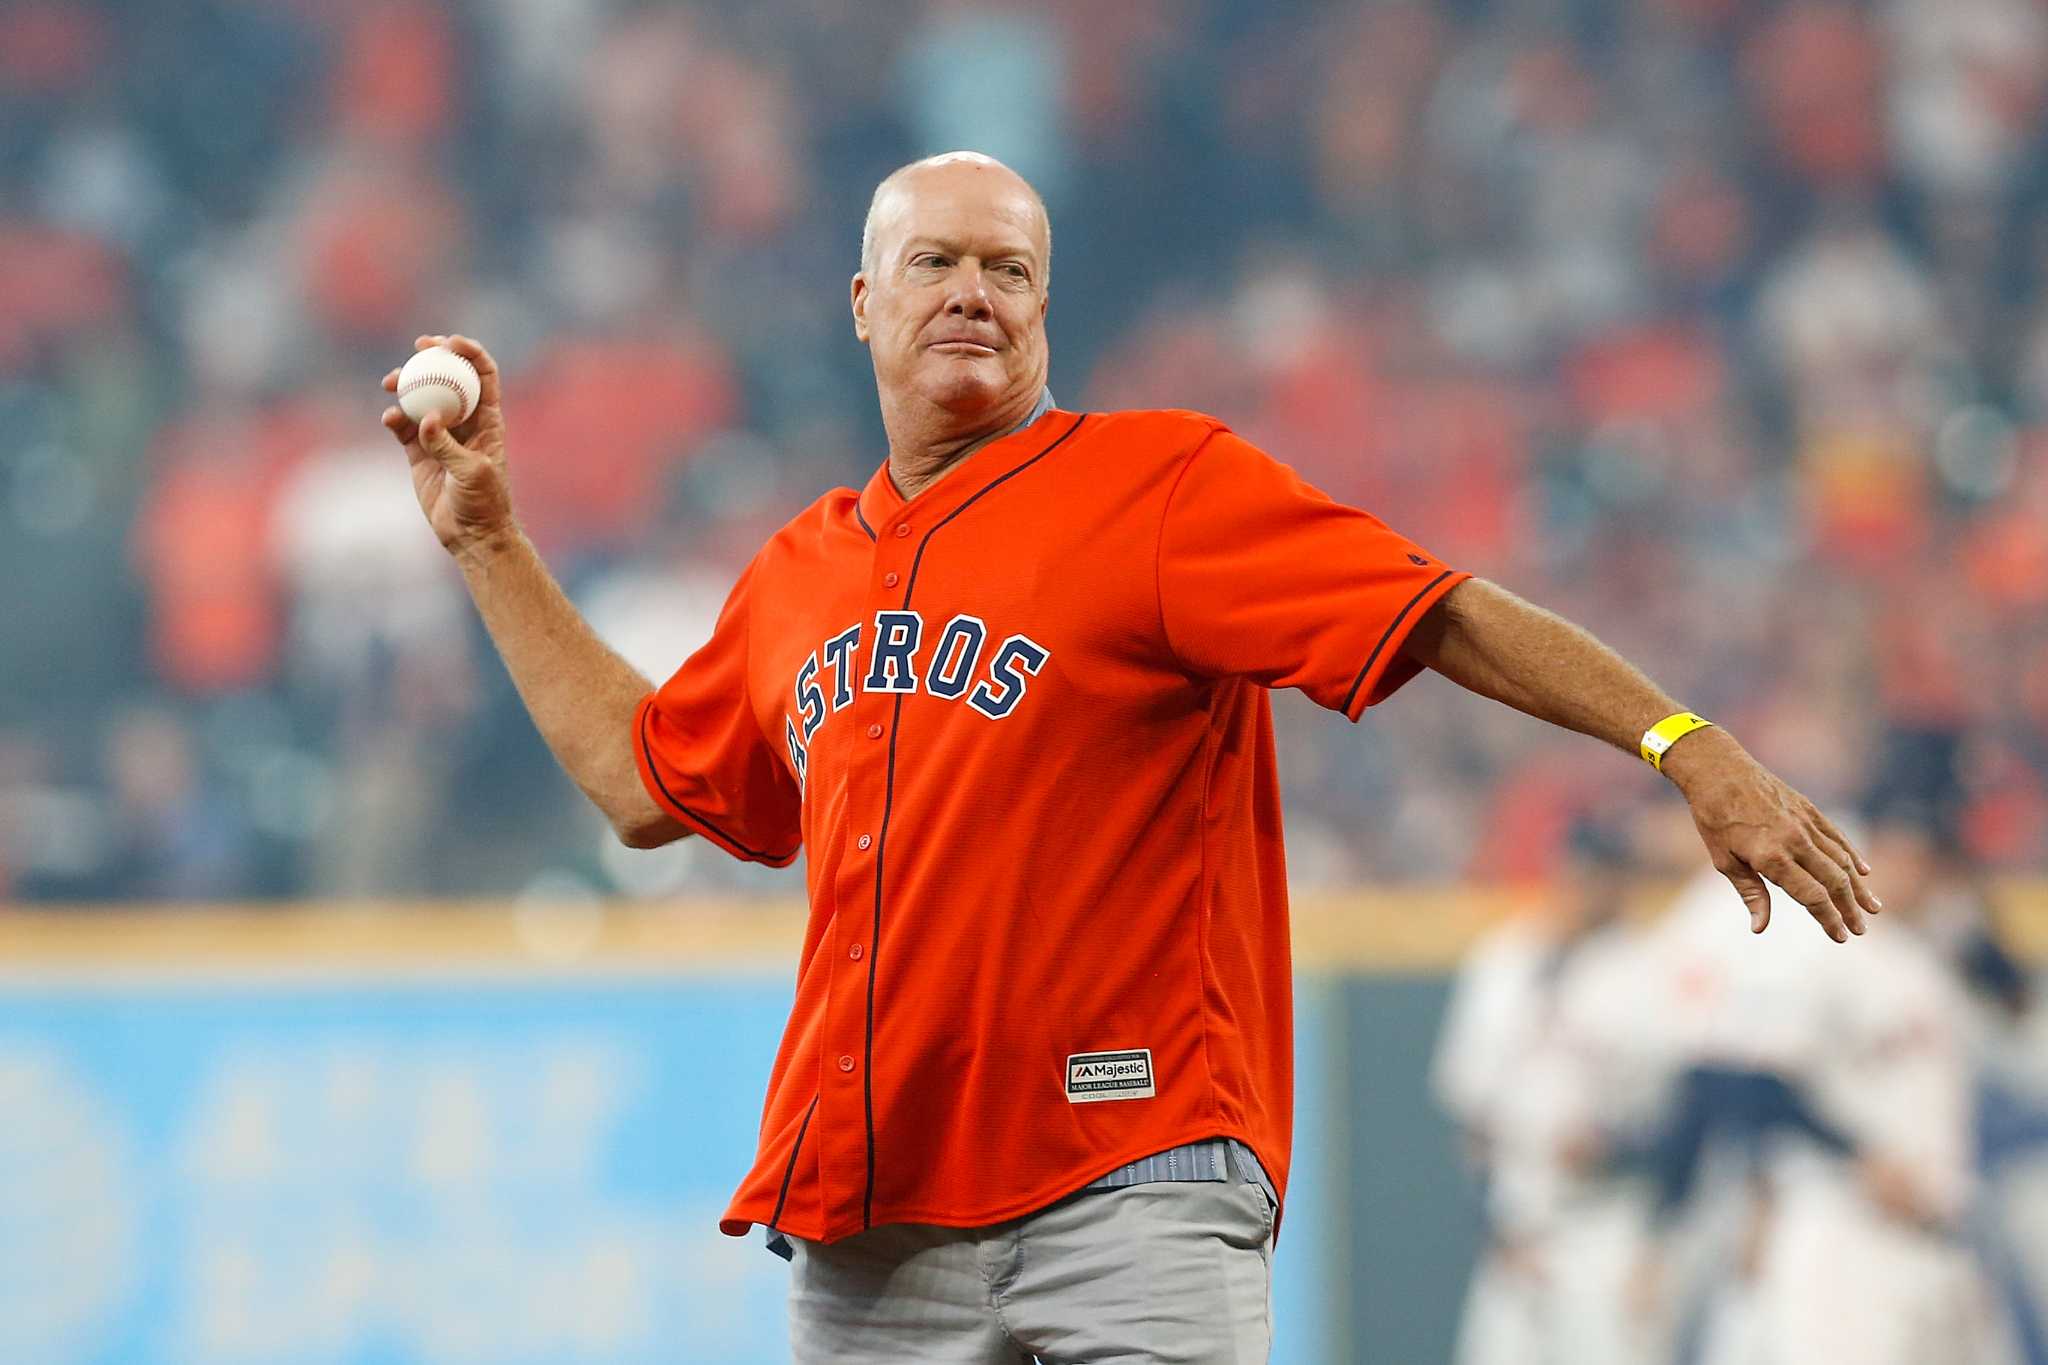 Big Days in Astros History - September 9, 1989 - Mike Scott wins 100th game  as Astro